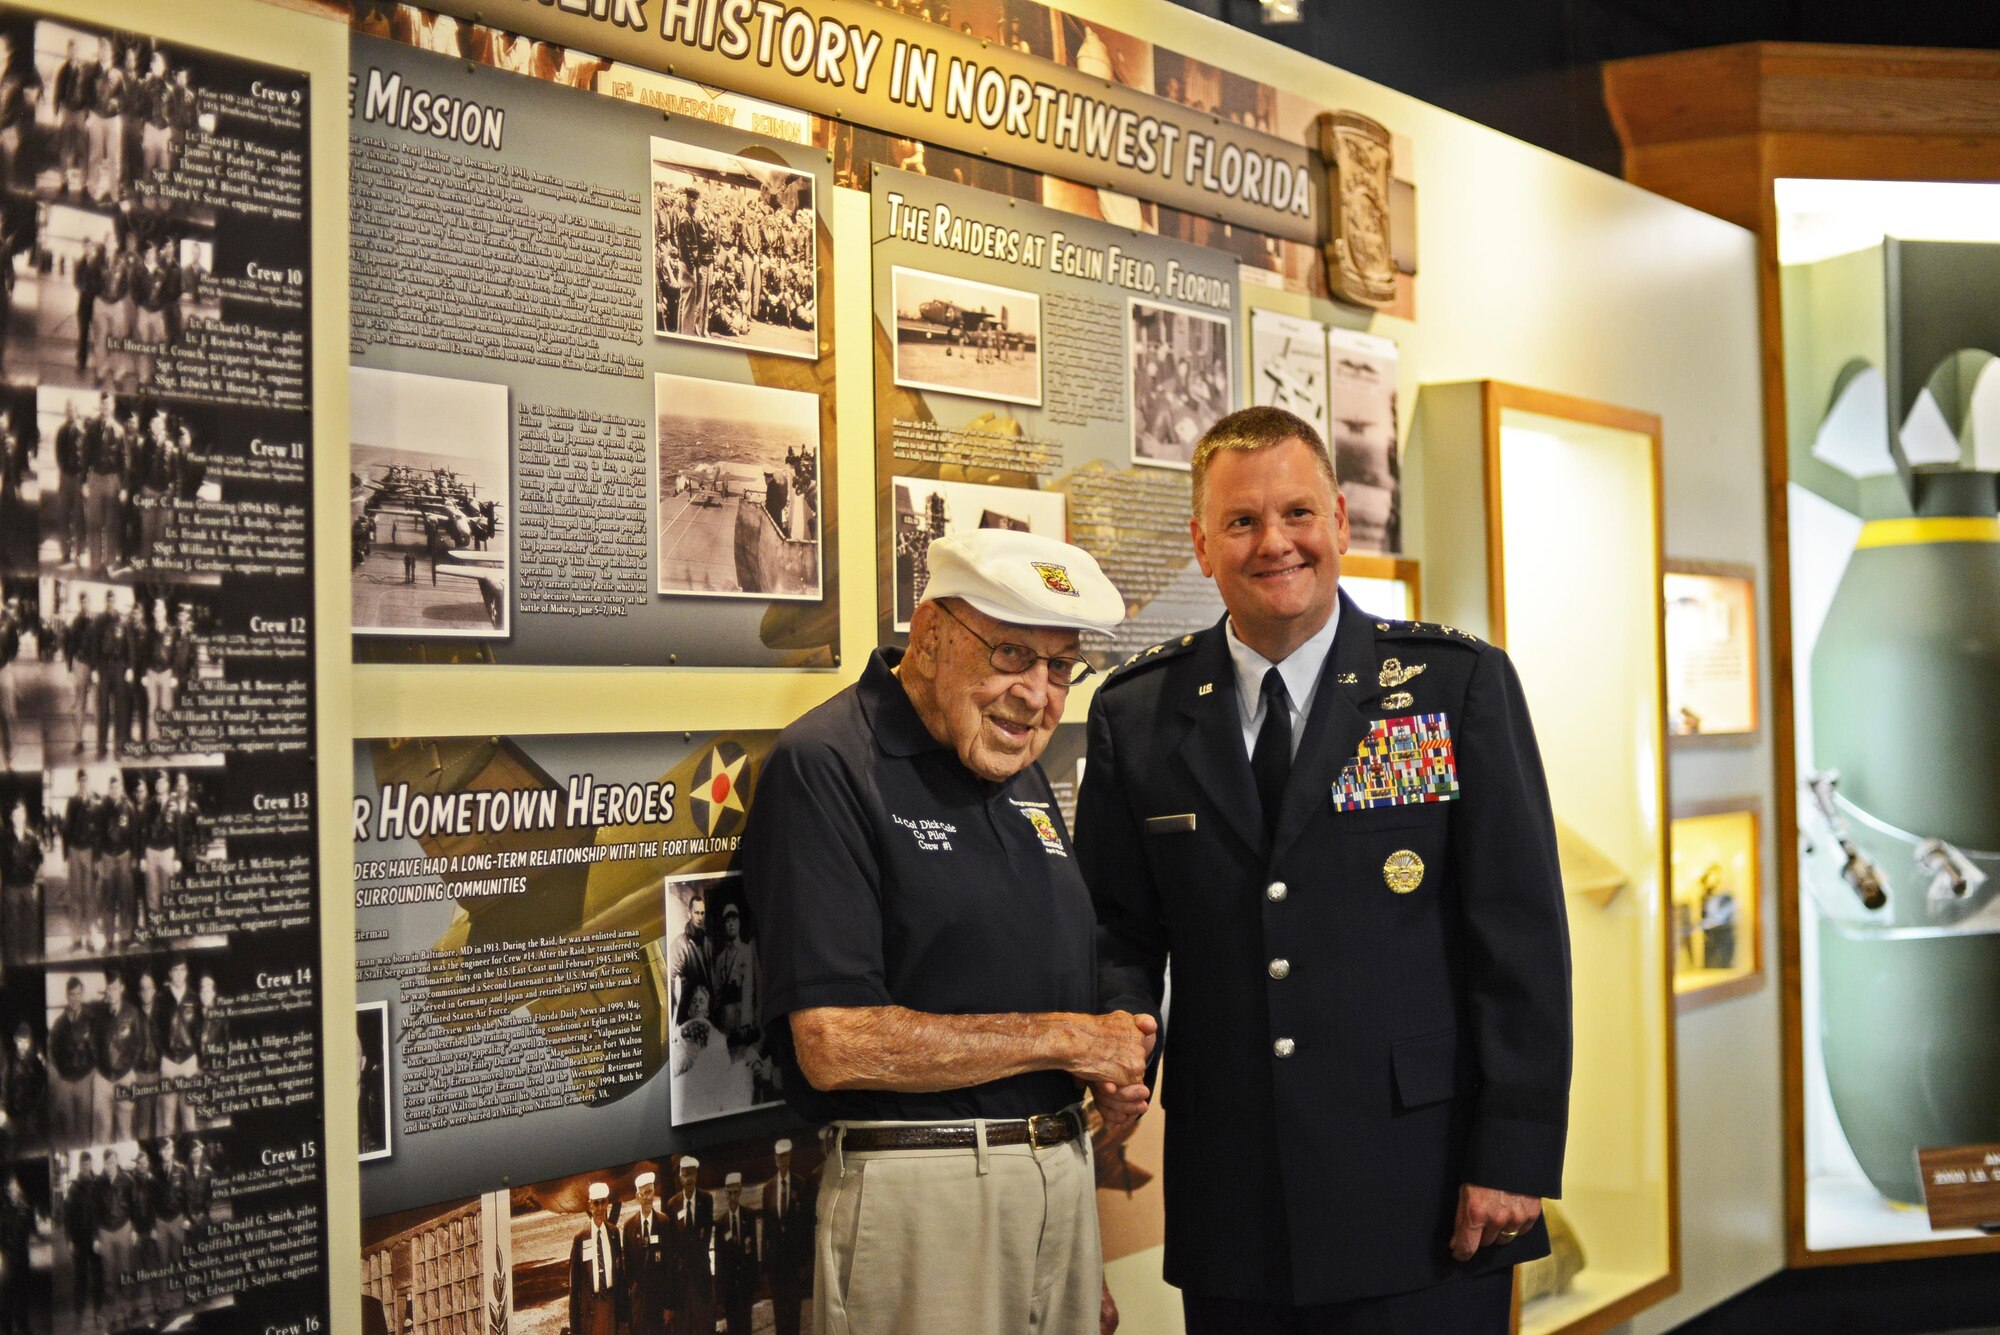 Lt. Col. (ret.) Richard “Dick” Cole greets Lt. Gen. Brad Webb, commander of Air Force Special Operations Command at the Doolittle Raider’s exhibit July 30, 2016 at the U.S. Air Force Armament Museum on Eglin Air Force Base, Fla. Webb spoke at the ceremony and highlighted the importance of Cole and his history as one of the founding members of the 1st Air Commando Group. (U.S. Air Force photo/Staff Sgt. Melanie Holochwost)